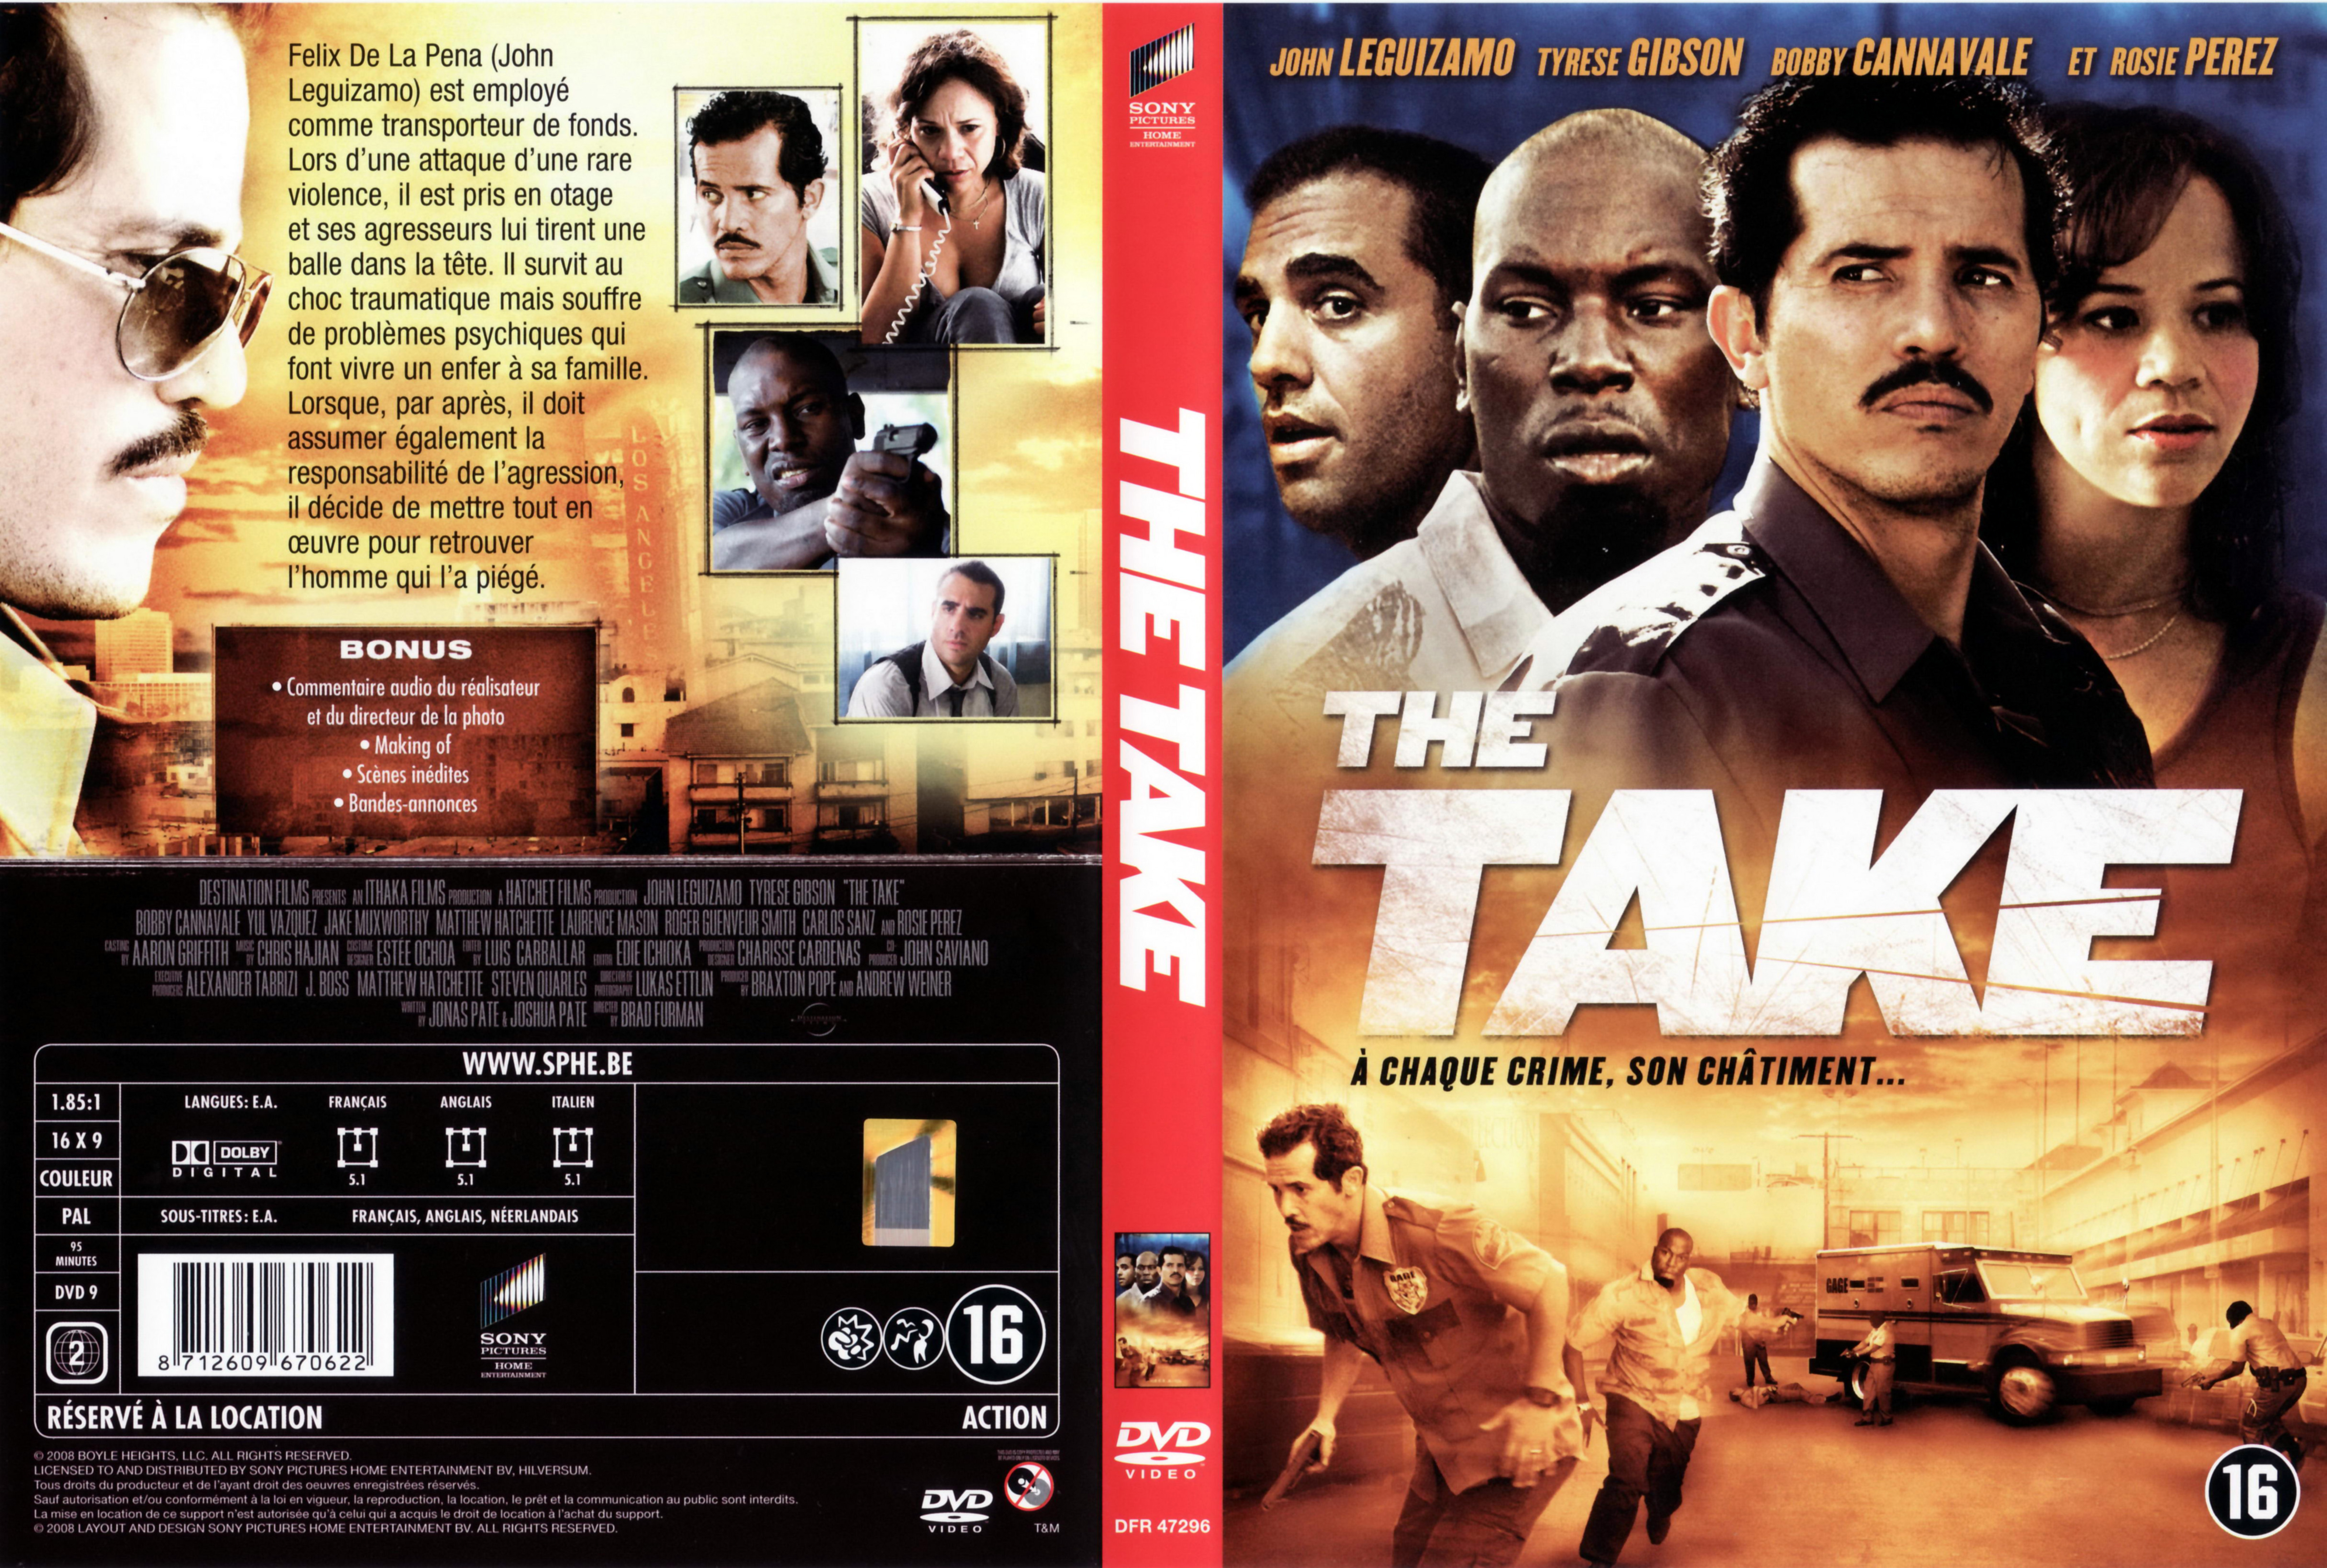 Jaquette DVD The take (2008)